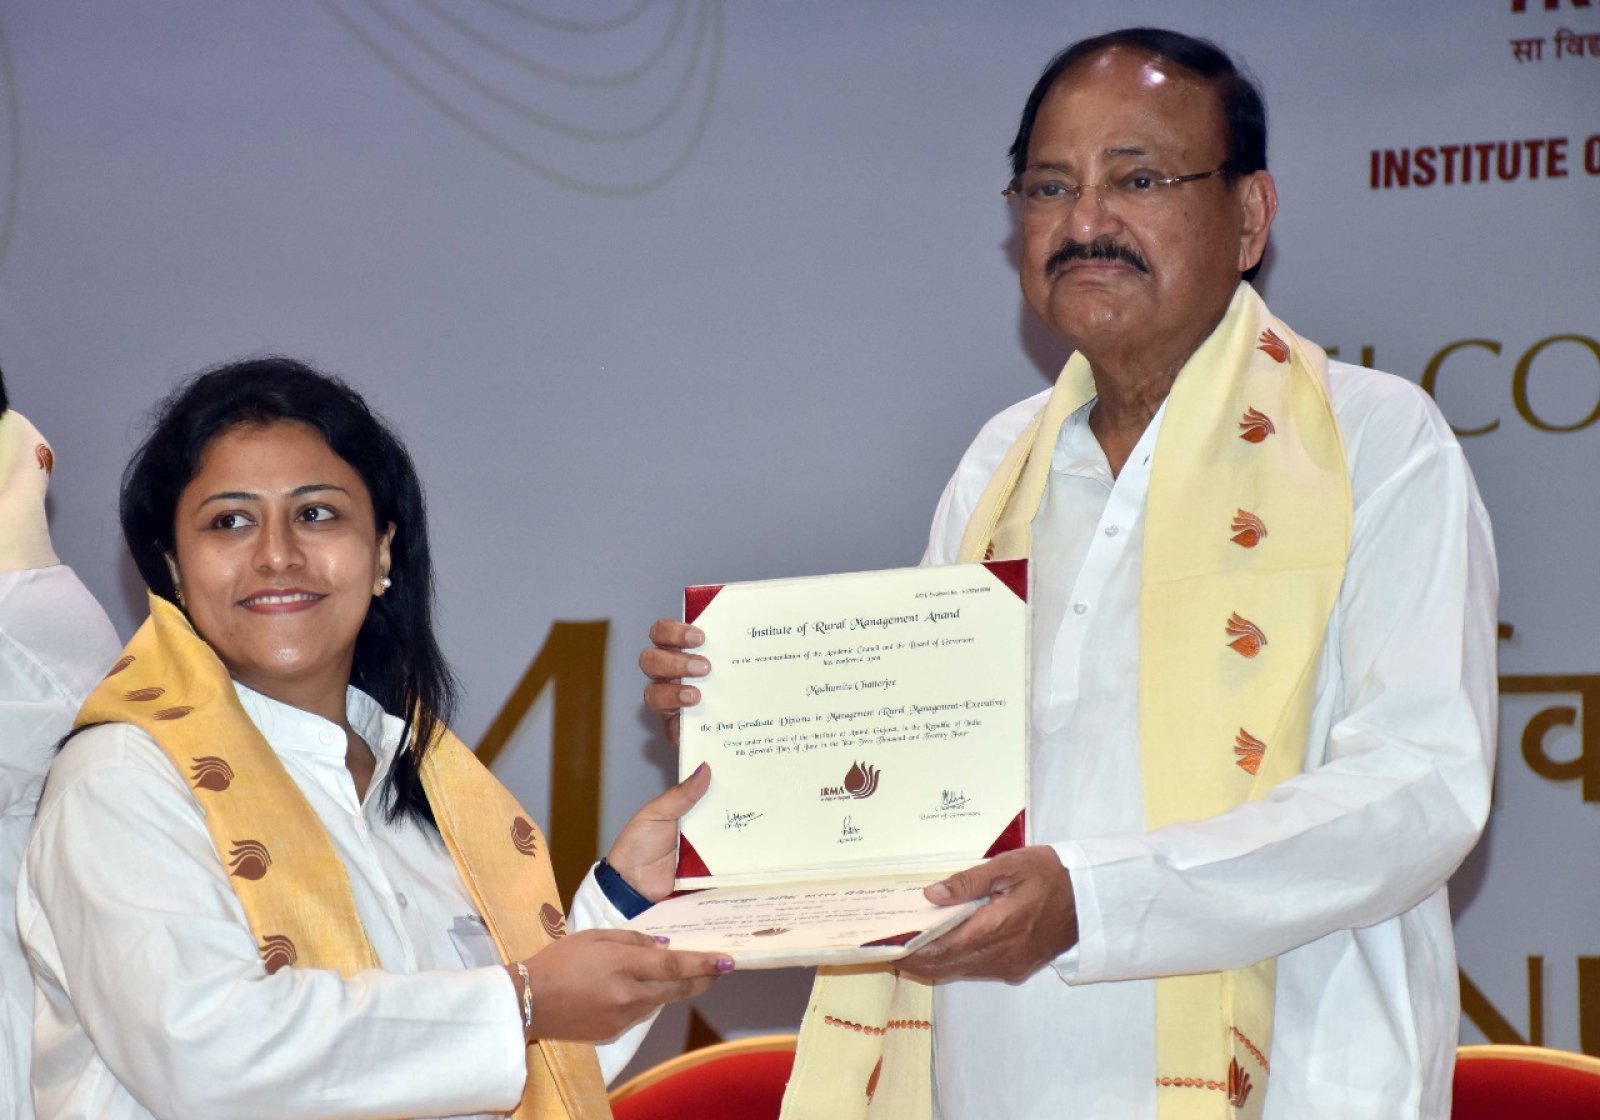 IRMA's students must play an important role in eliminating the gaps between urban and rural India: Venkaiah Naidu